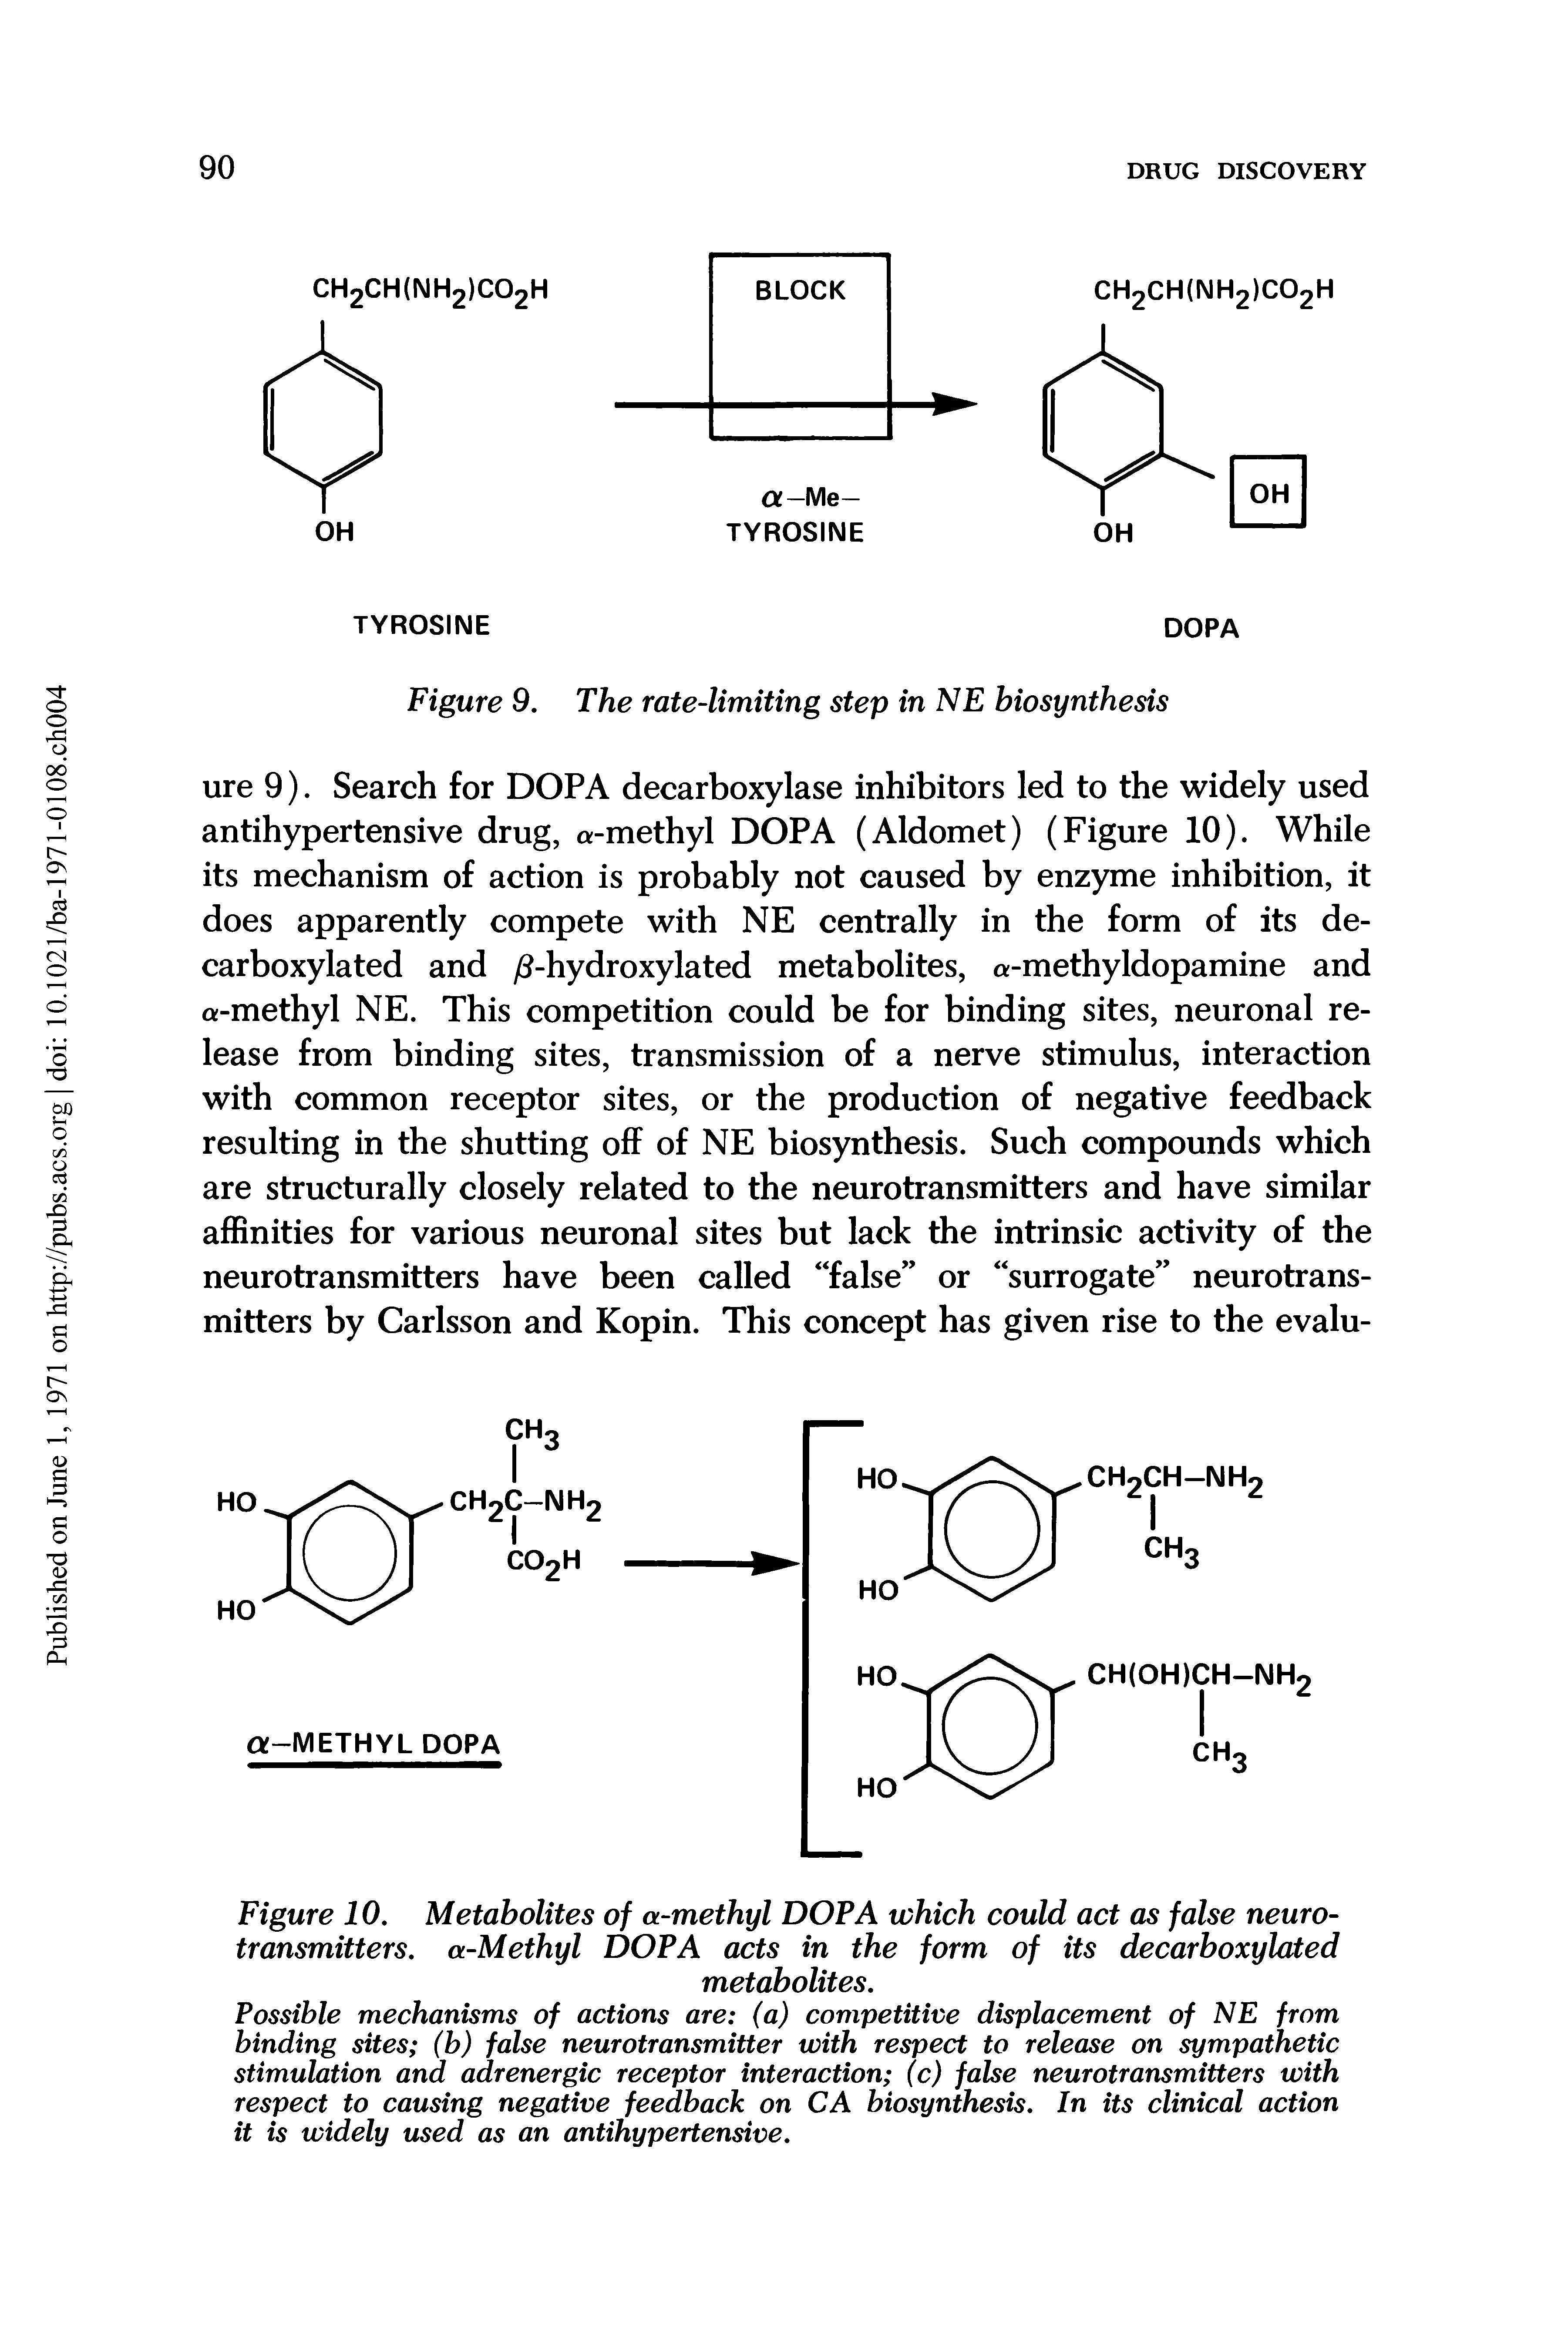 Figure 10. Metabolites of a-methyl DOPA which could act as false neurotransmitters. a-Methyl DOPA acts in the form of its decarboxylated...